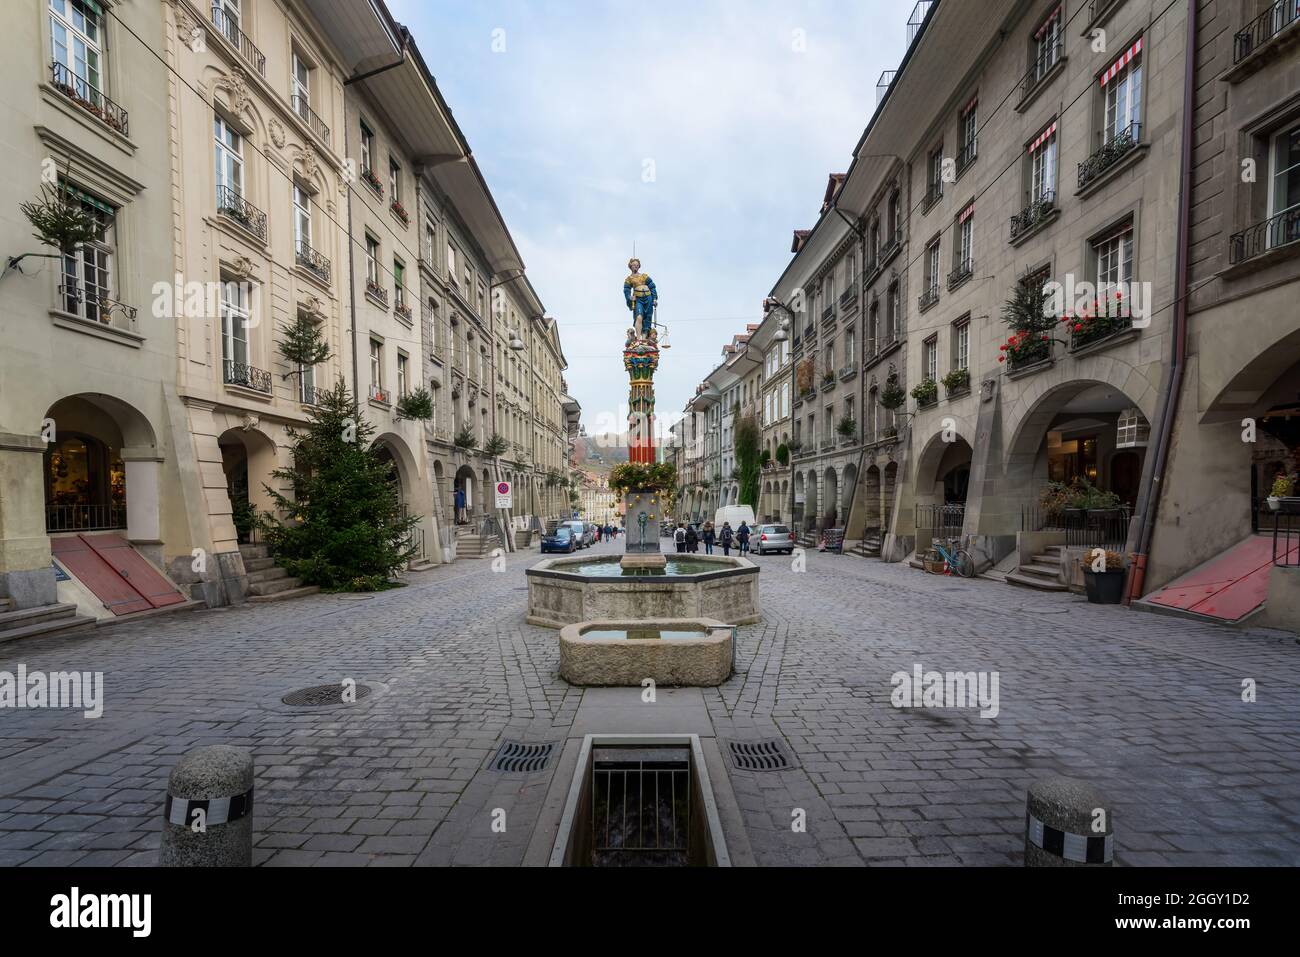 Fountain of Justice (Gerechtigkeitsbrunnen) - one of the medieval fountains of Bern Old Town - Bern, Switzerland Stock Photo